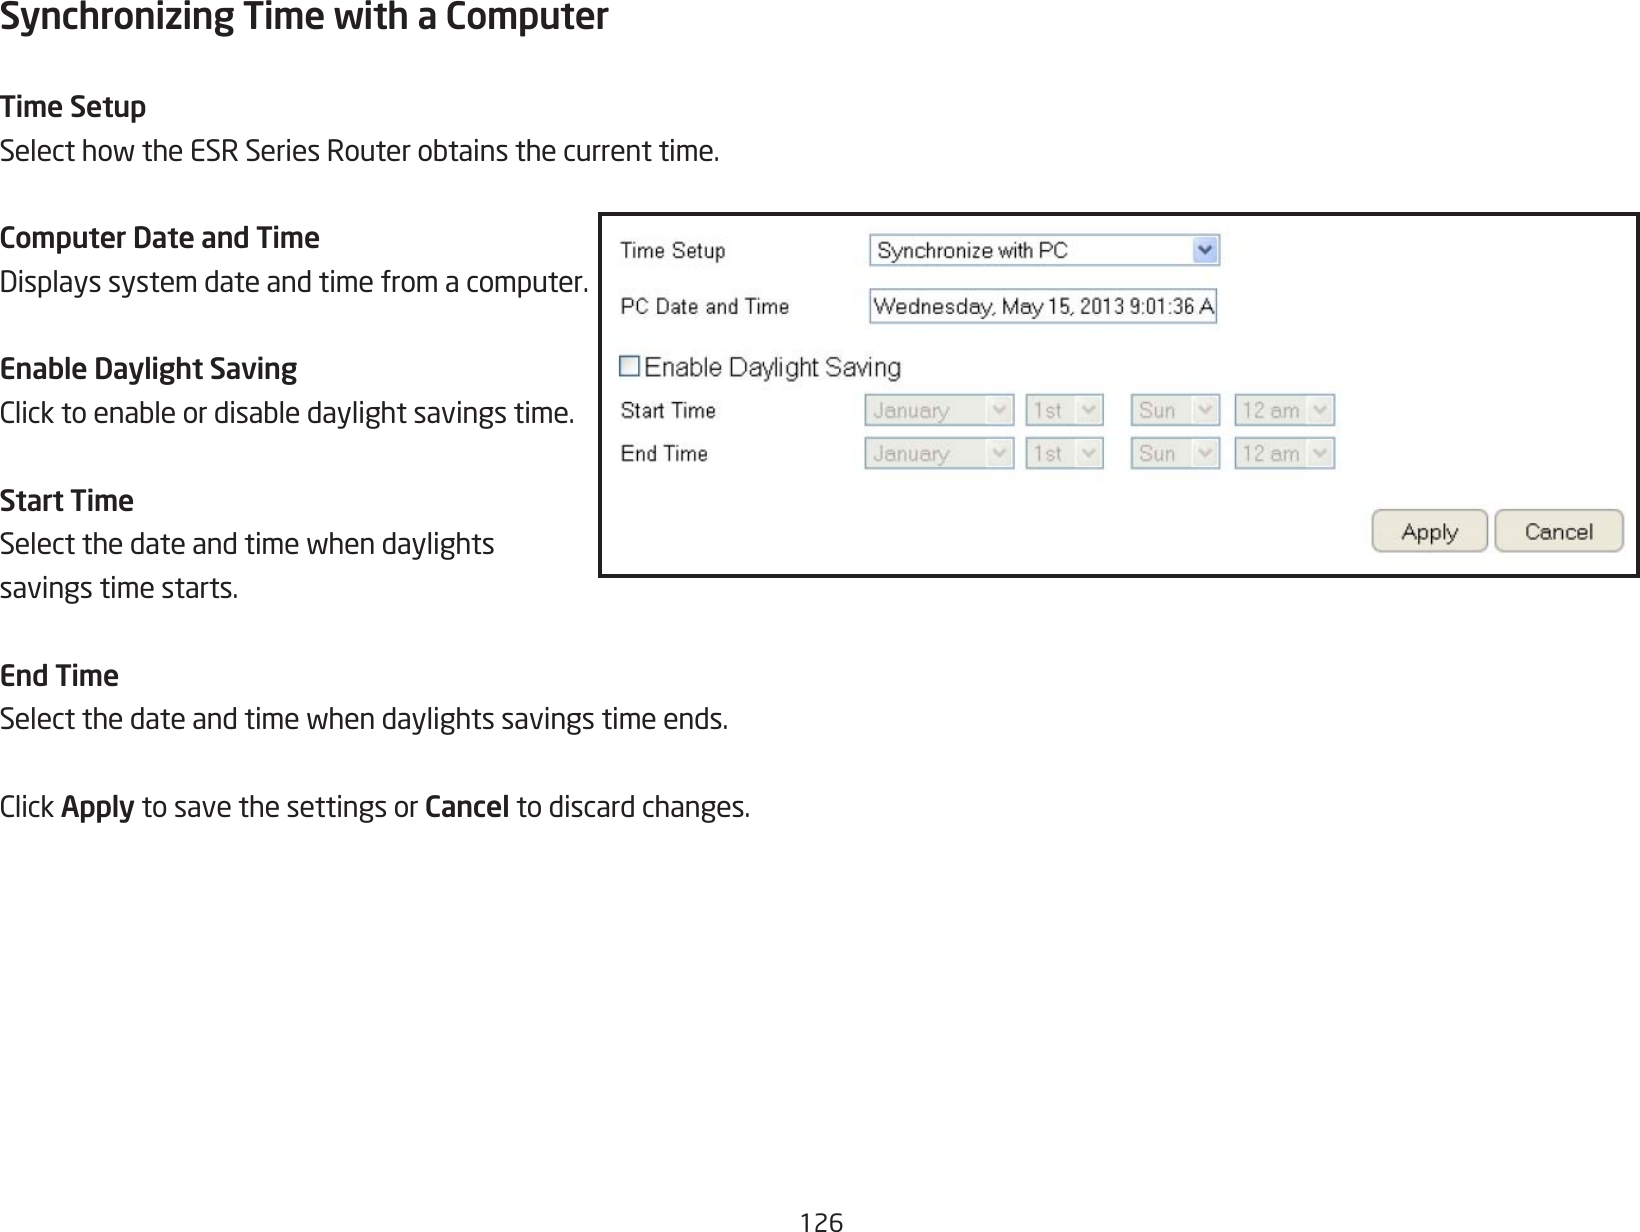 126Synchronizing Time with a ComputerTime SetupSelecthowtheESRSeriesRouterobtainsthecurrenttime.Computer Date and TimeDisplayssystemdateandtimefromacomputer.Enable Daylight SavingClicktoenableordisabledaylightsavingstime.Start TimeSelectthedateandtimewhendaylightssavings time starts.End TimeSelectthedateandtimewhendaylightssavingstimeends.ClickApply to save the settings or Cancel to discard changes.